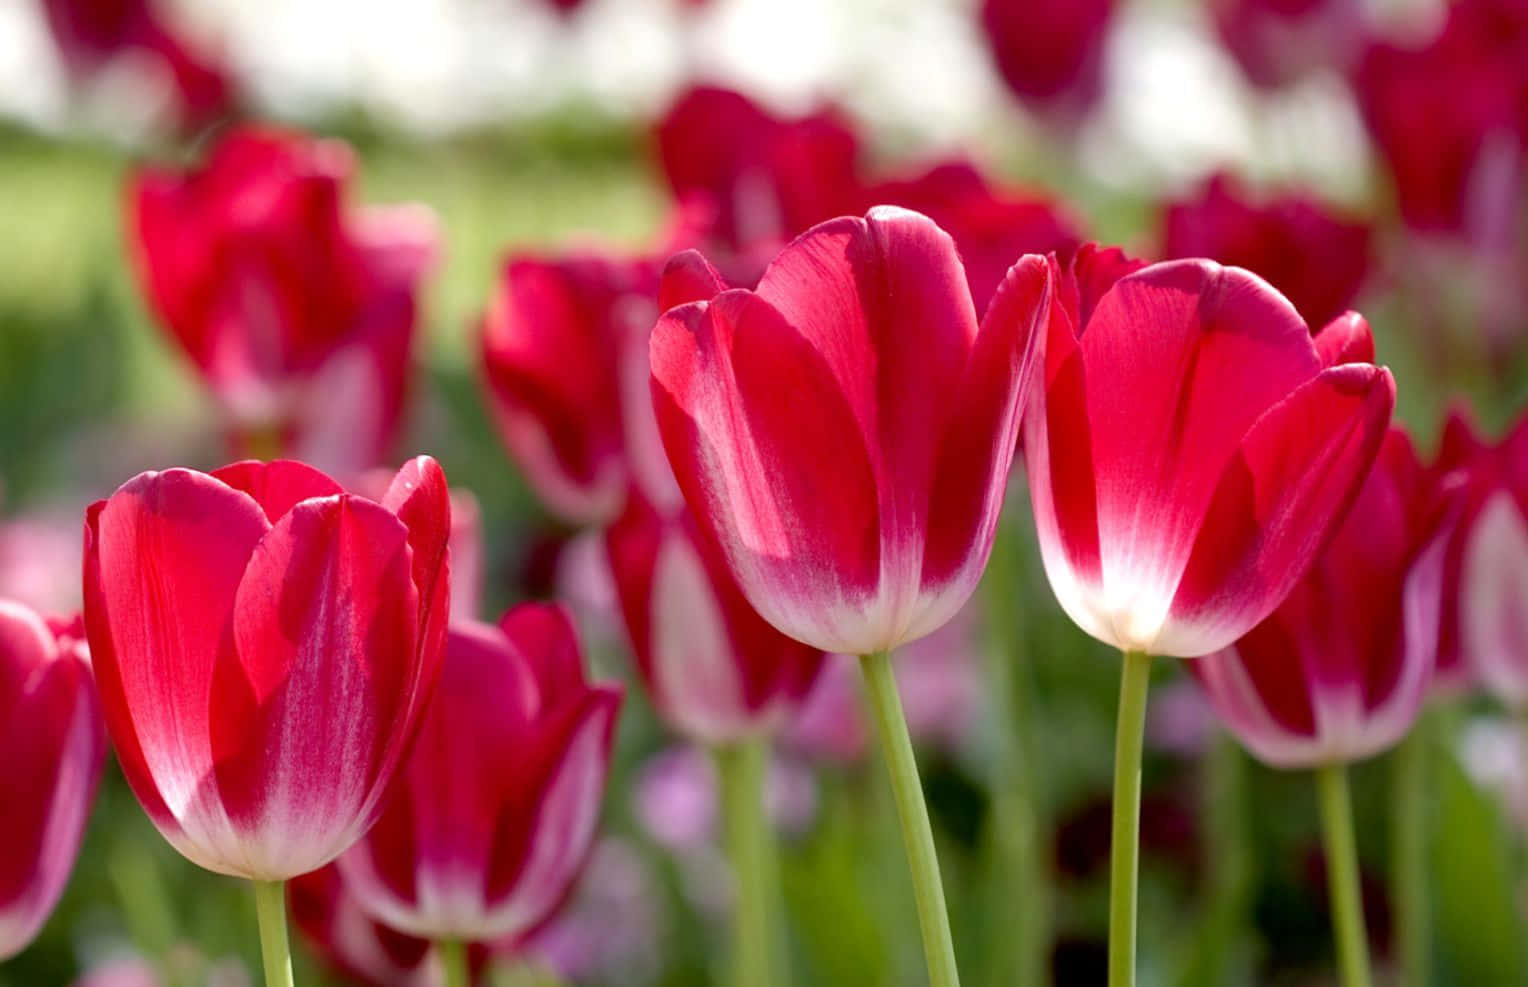 "A Vibrant Display of Fresh Spring Flowers" Wallpaper